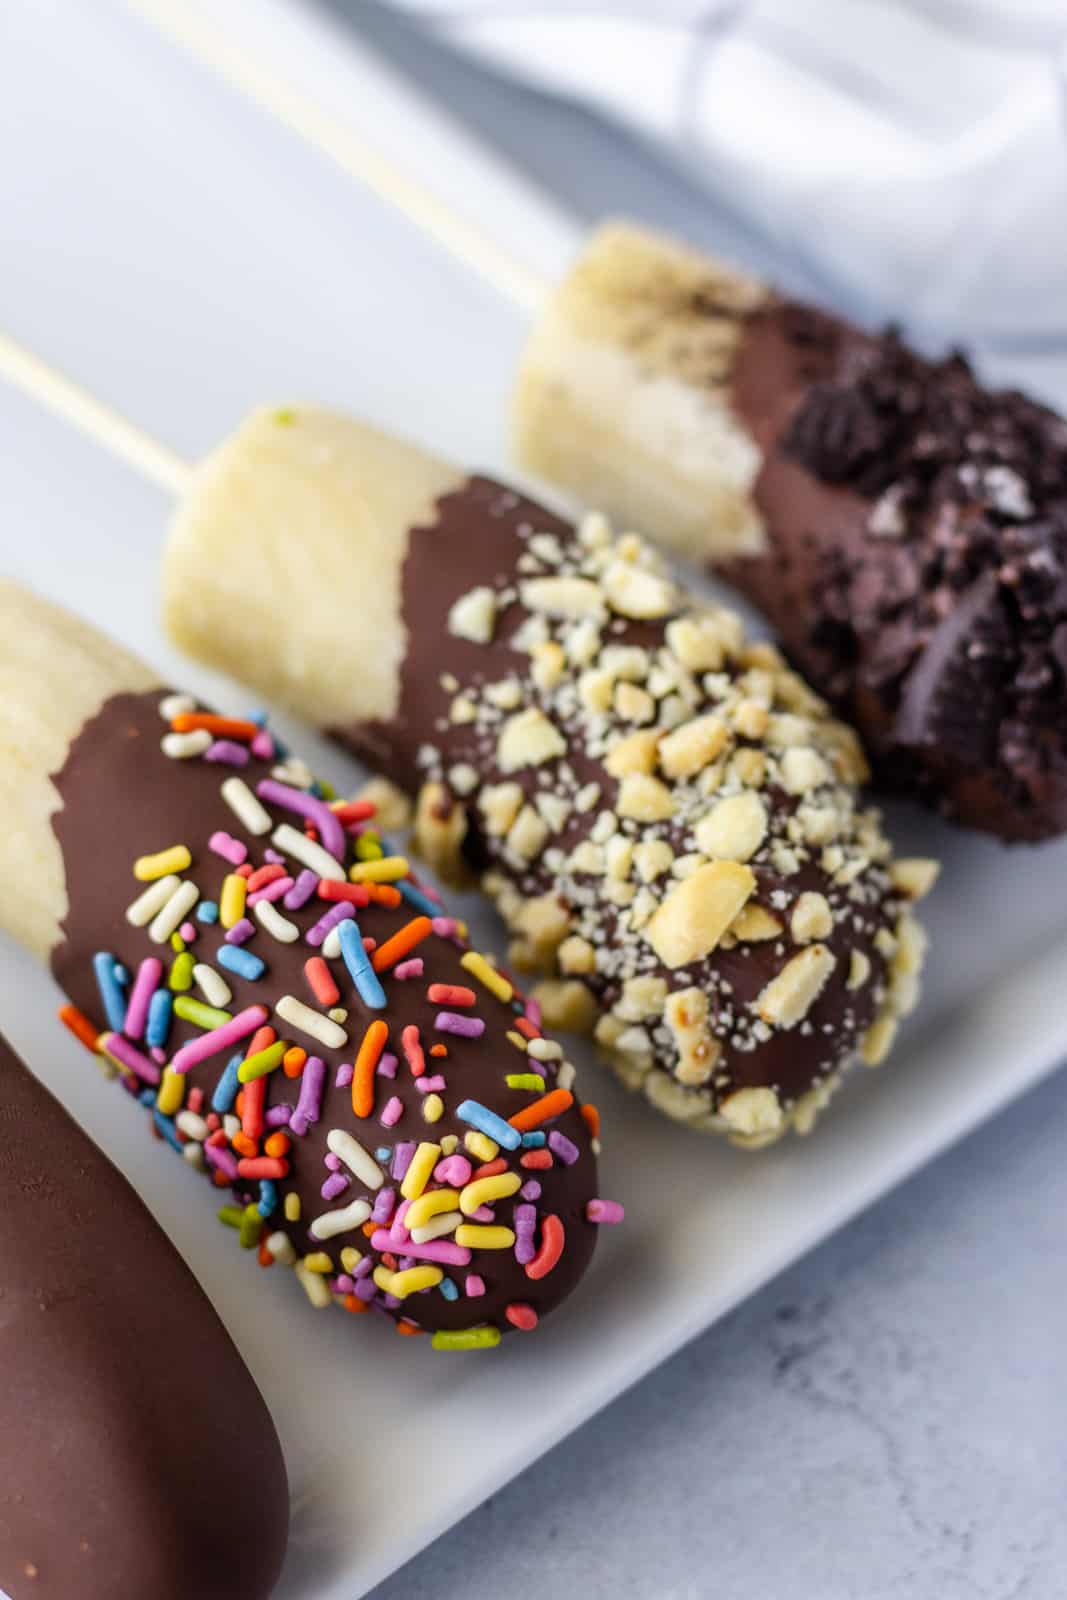 Up close view of dipped bananas with sprinkles and crushed peanuts.